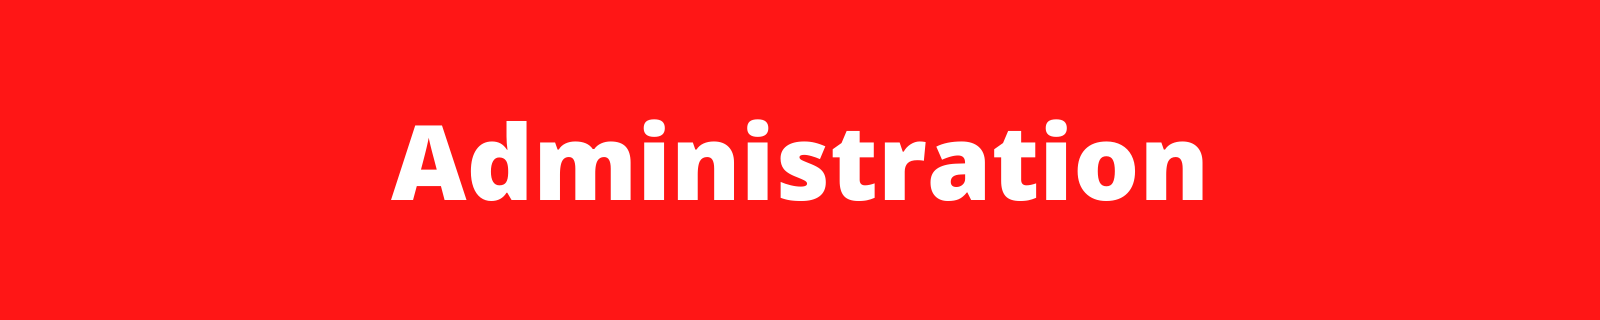 header that reads "administration"